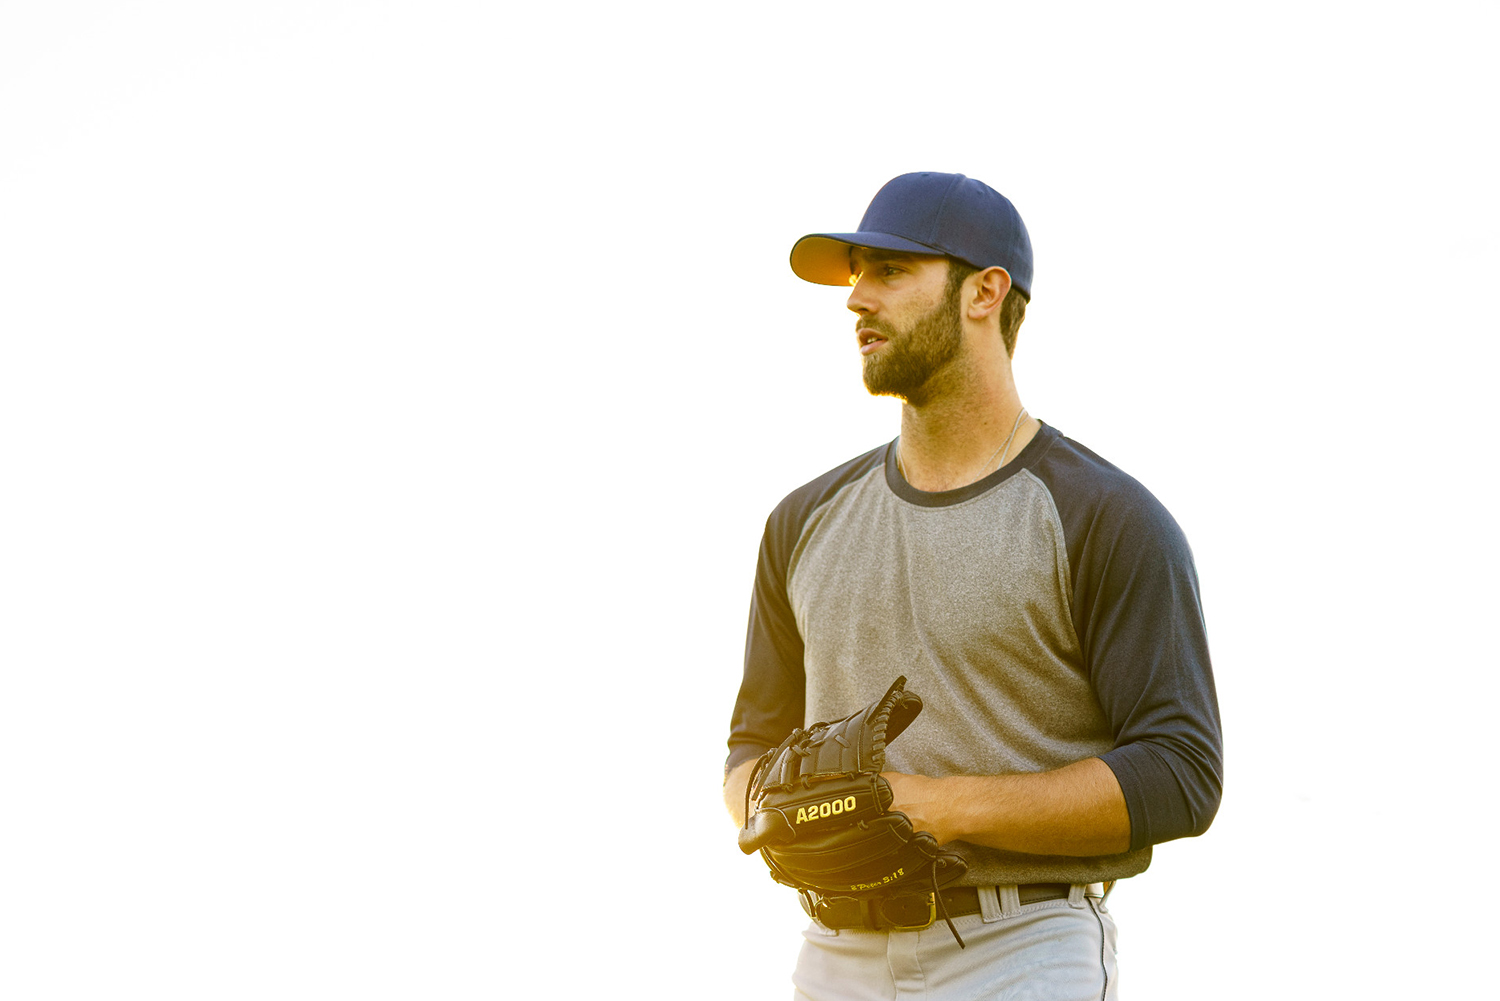 Daniel Norris - Things might seem upside down right now